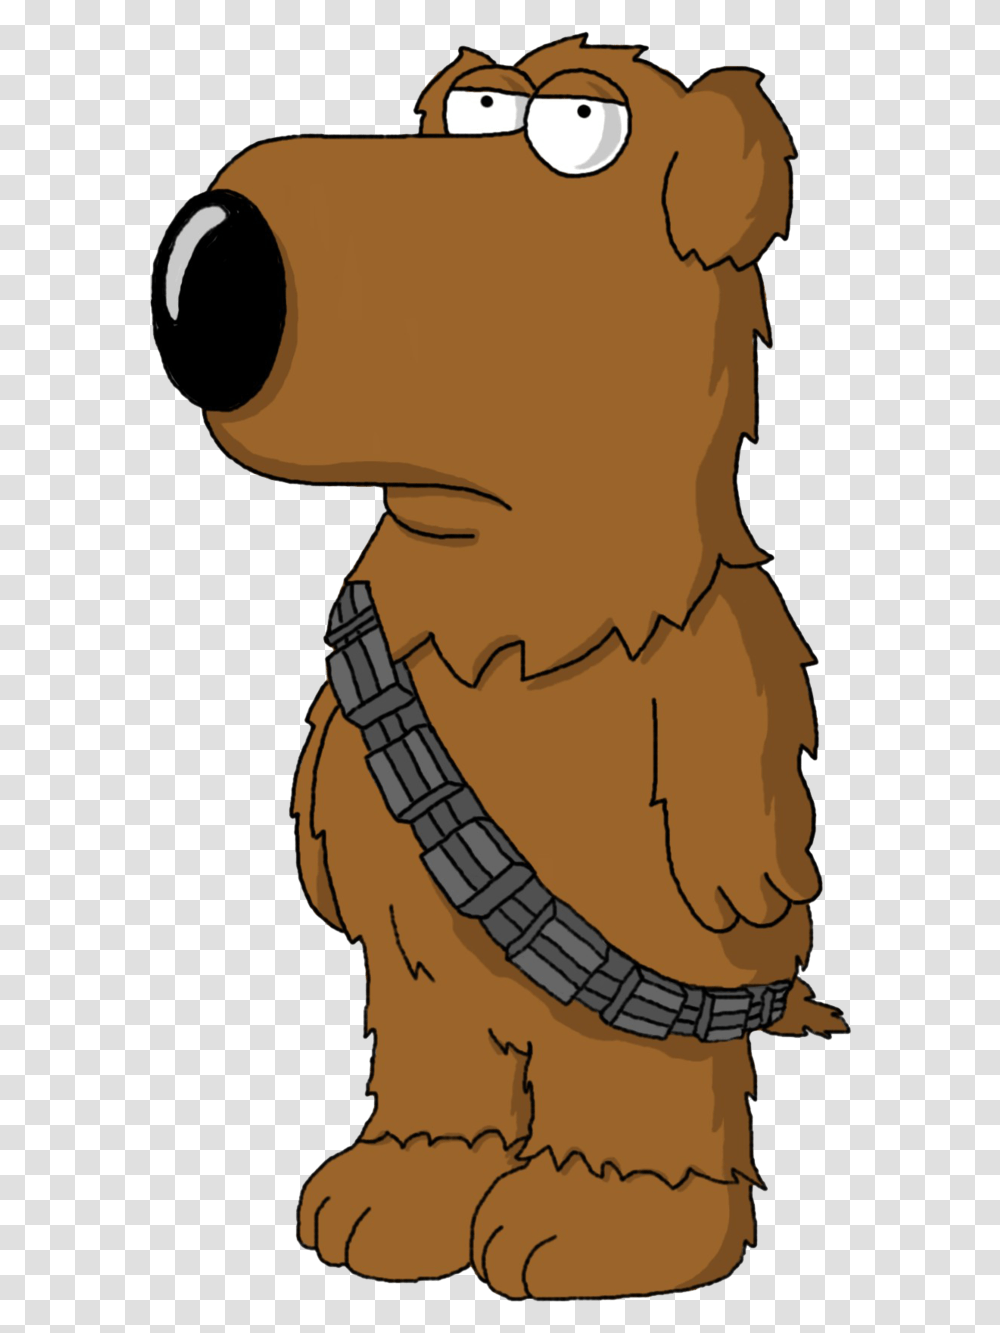 Star Wars Brian As Chewbacca Clipart Family Guy Star Wars Brian, Accessories, Accessory, Jewelry, Necklace Transparent Png